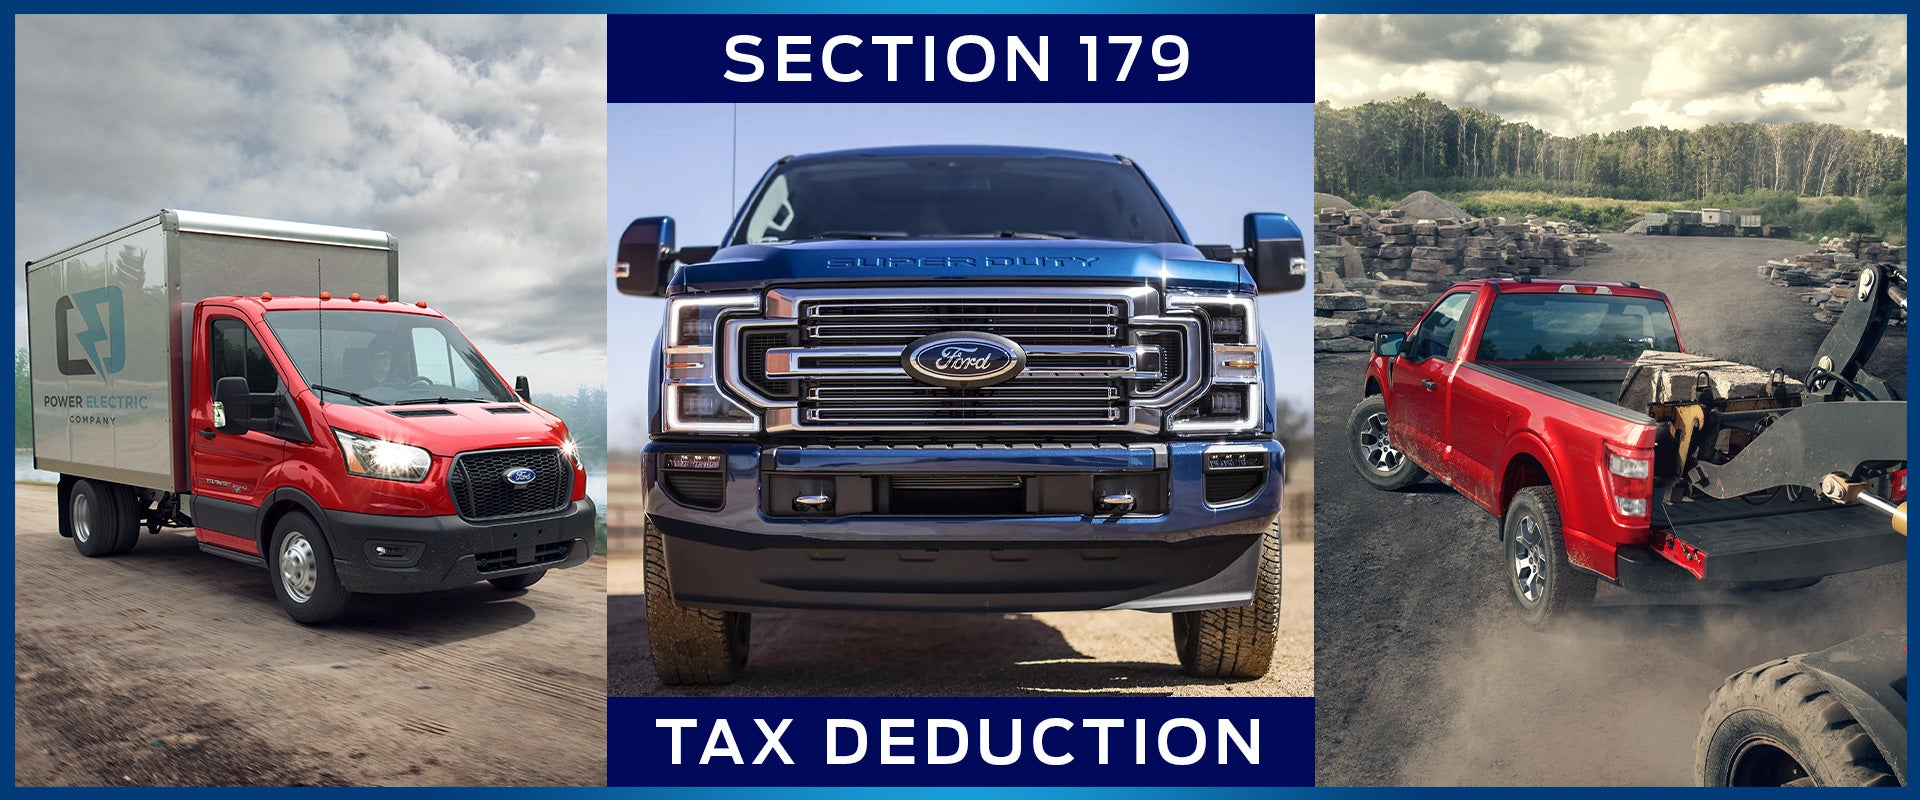 What Vehicles Are Eligible For Section 179? See Pickup Trucks & SUVs